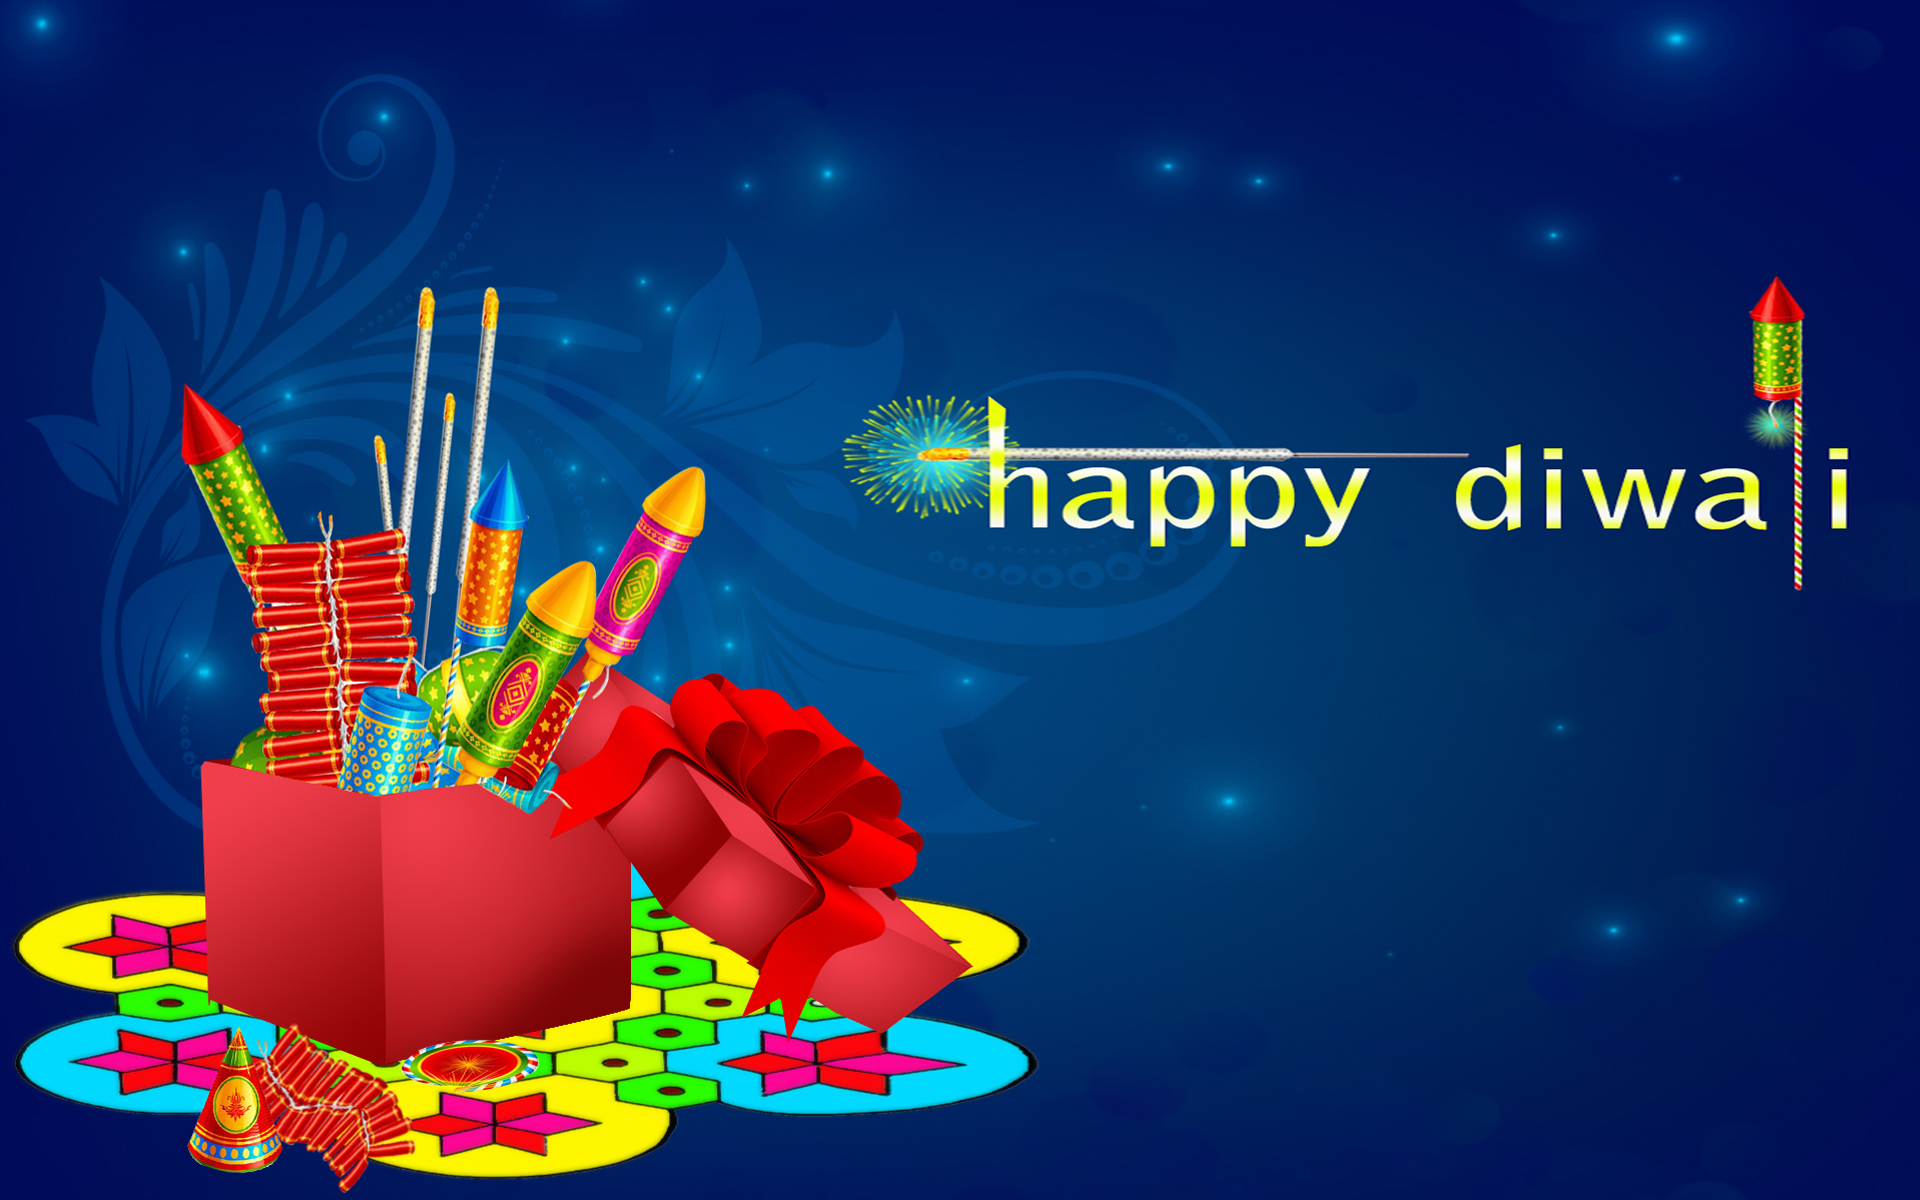 Happy Diwali Colorful Crackers Blue Background Desktop Hd Wallpaper For  Mobile Phones Tablet And Pc 1920x1200 : 